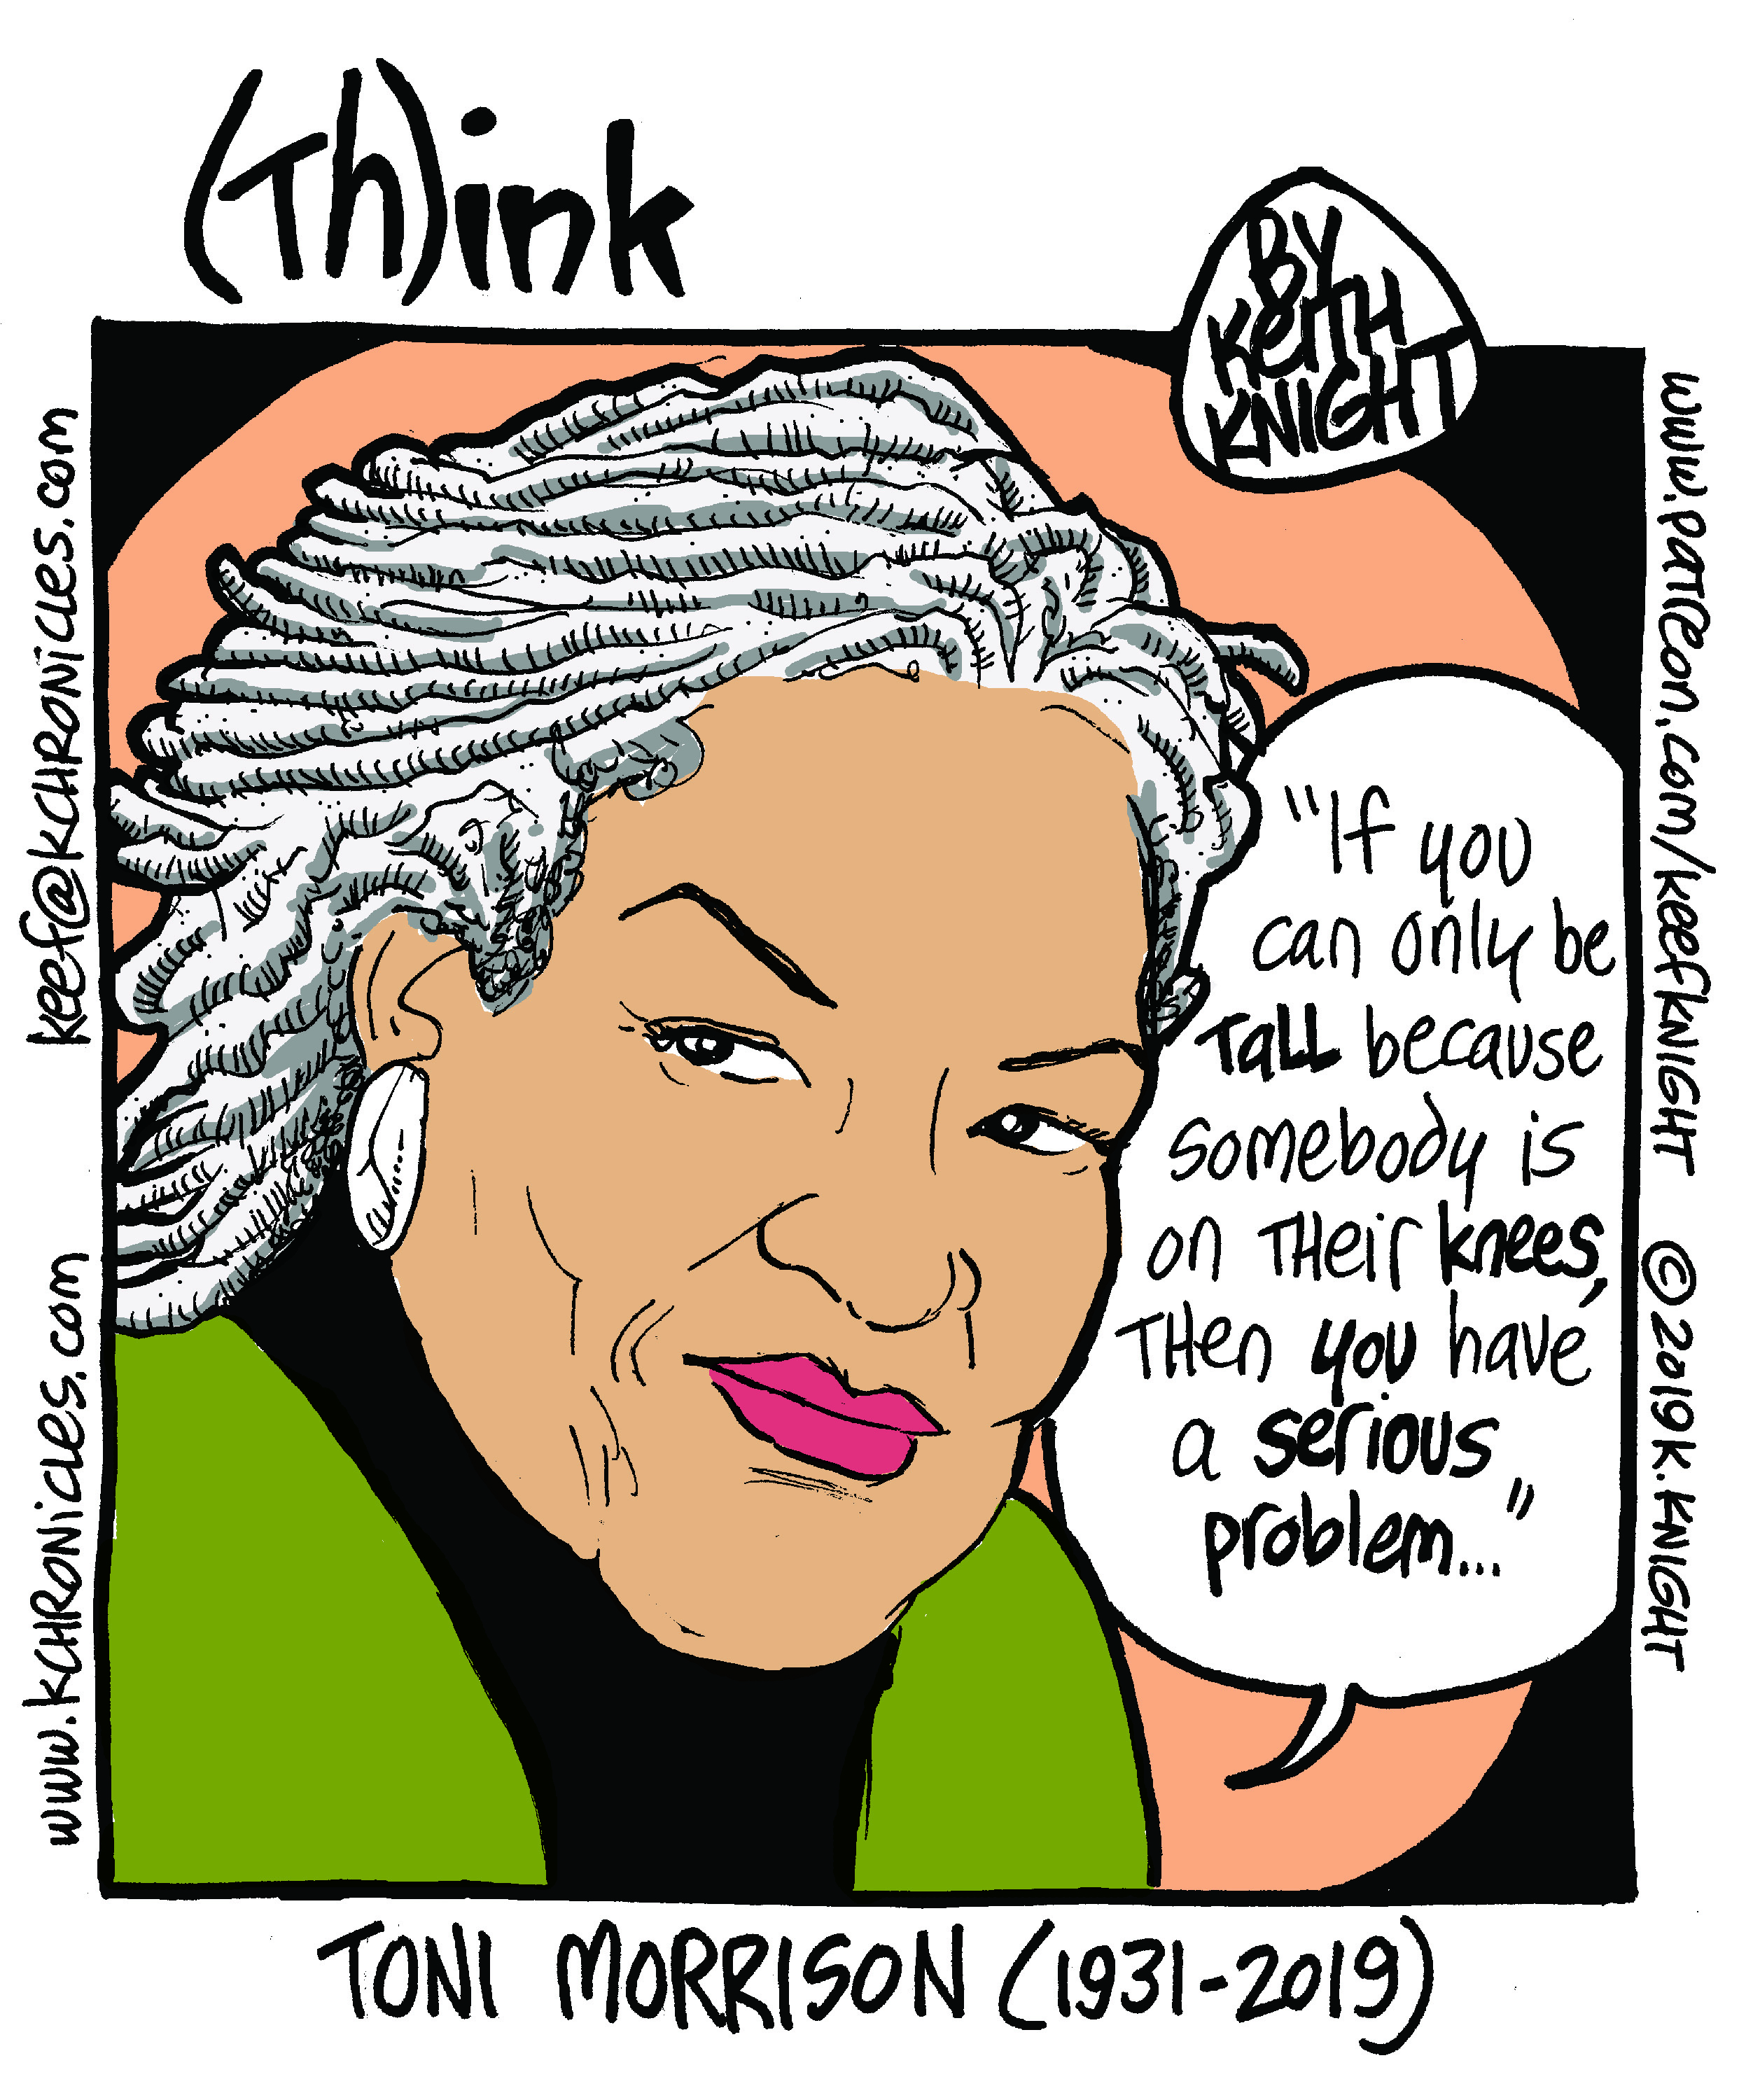 A cartoon of Toni Morrison by Keith Knight, saying 